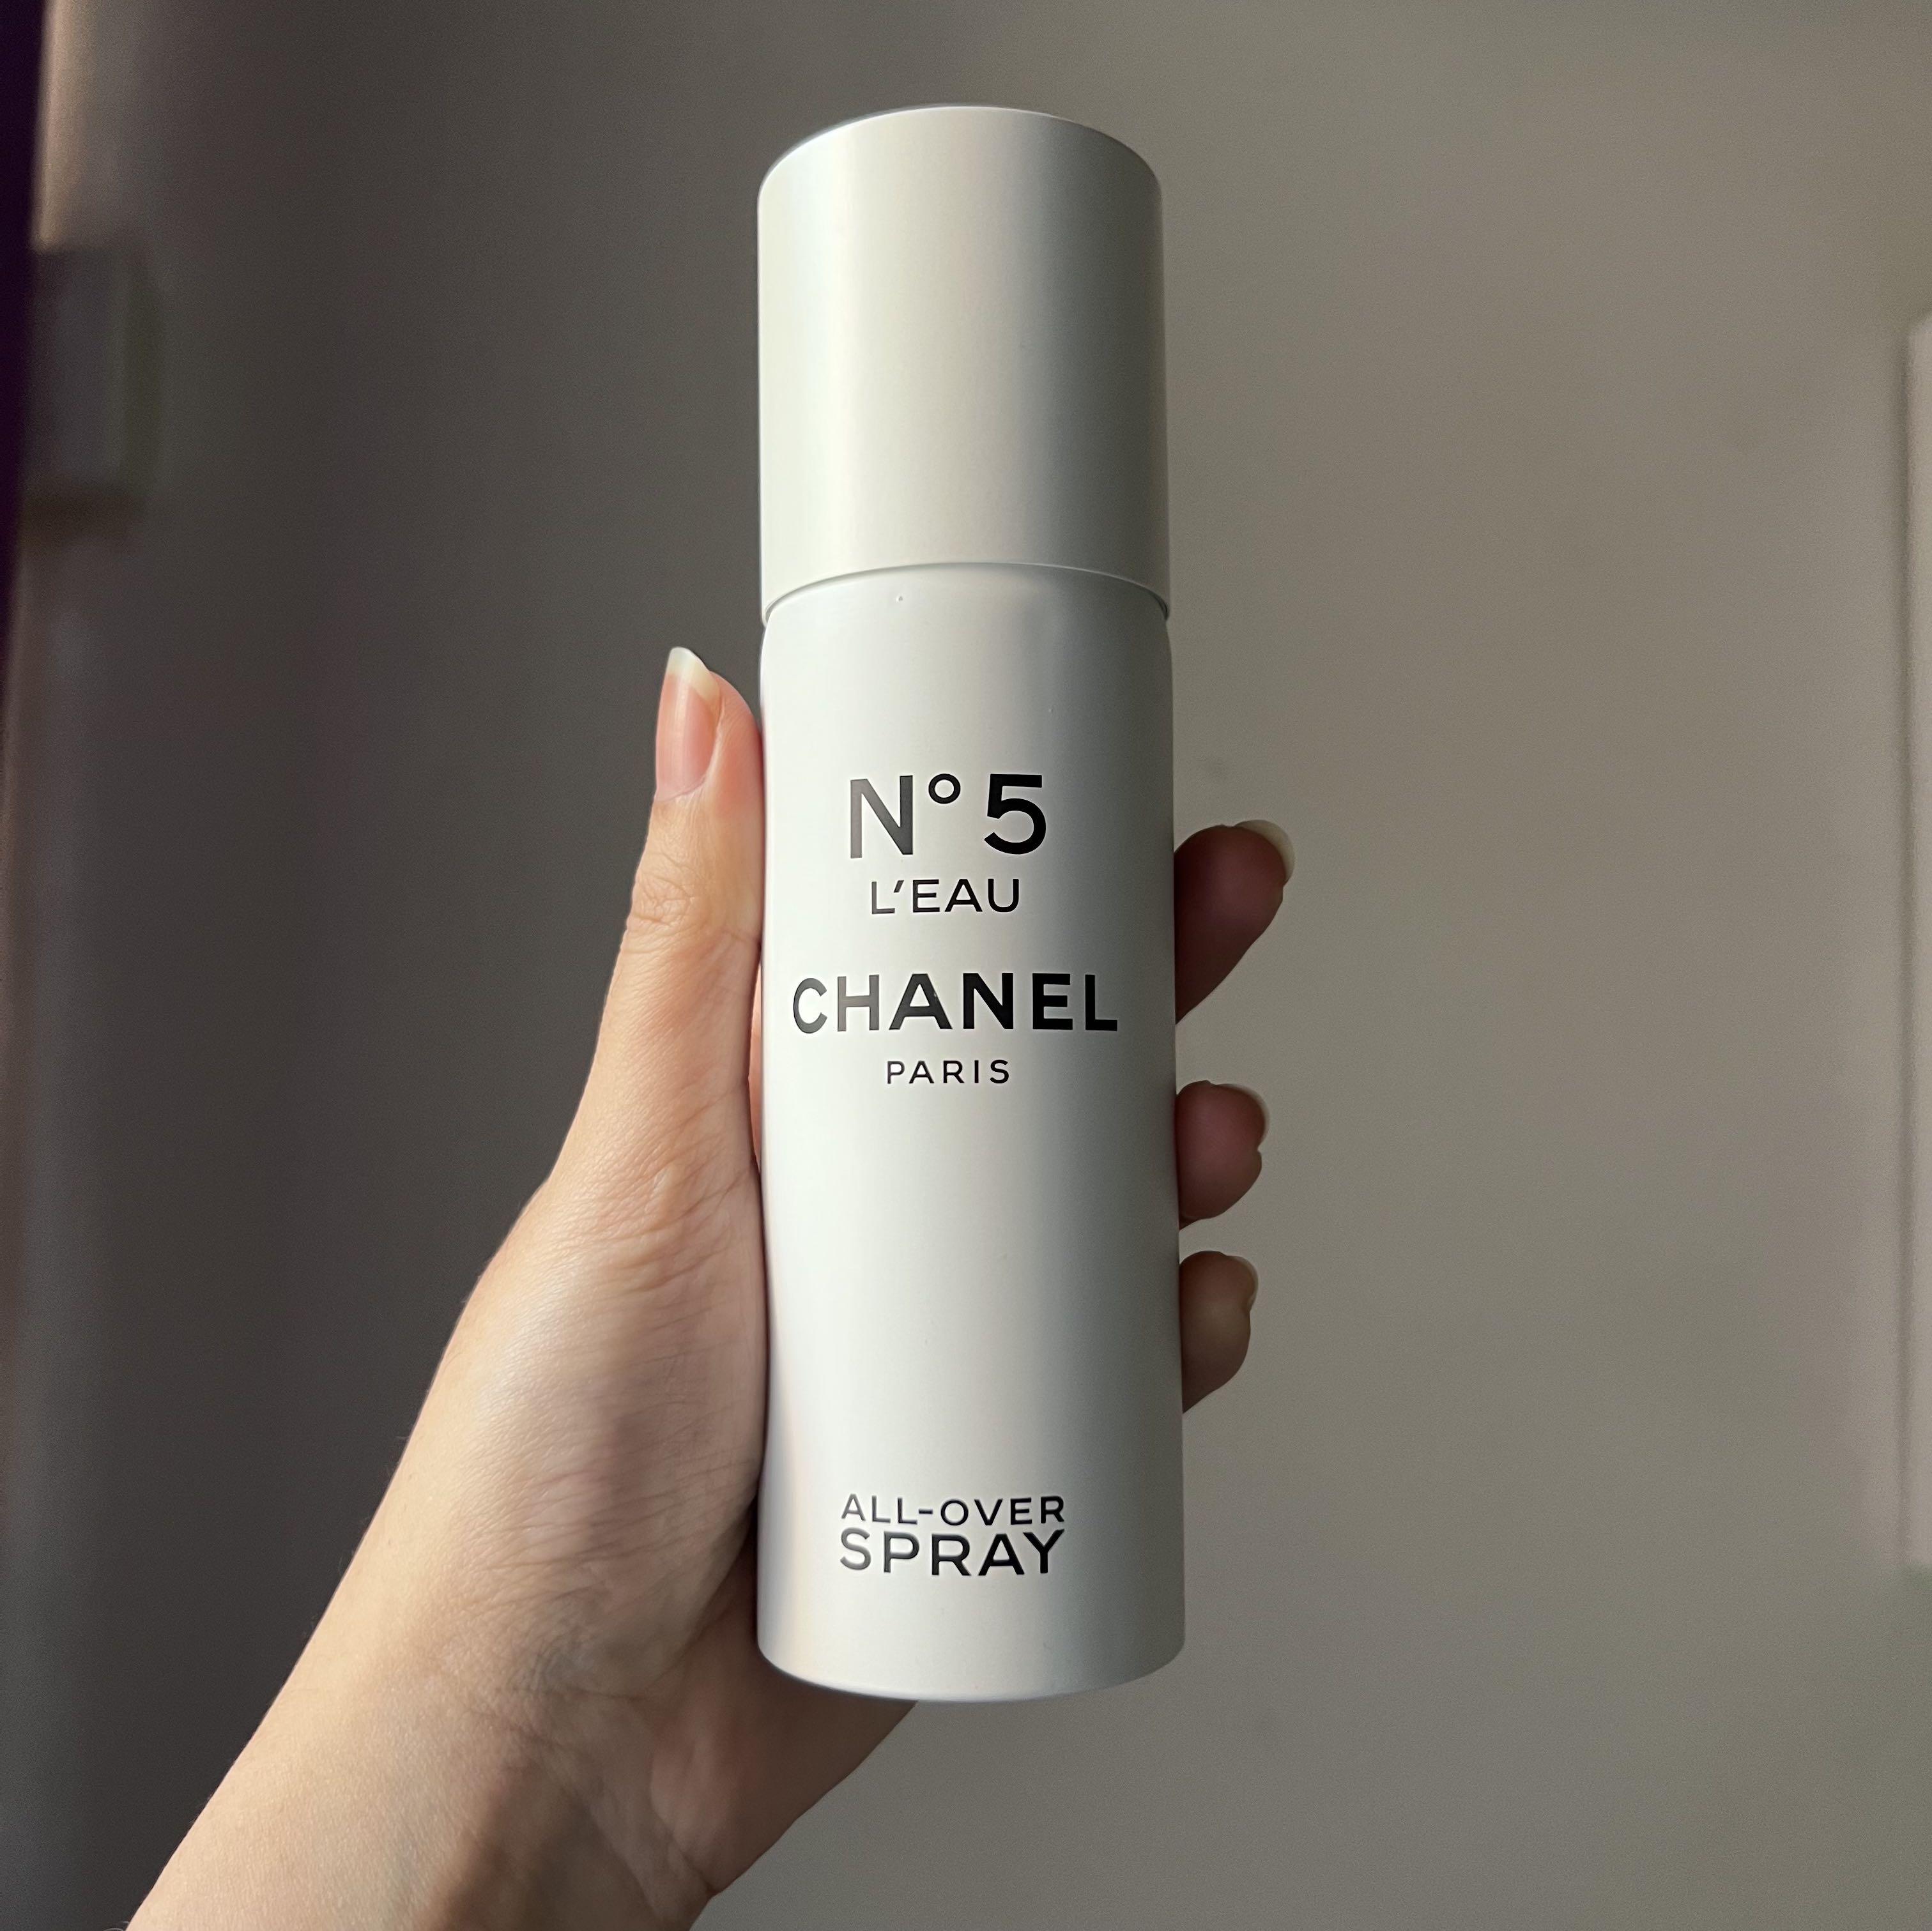 Chanel No 5 Leau All-Over Spray